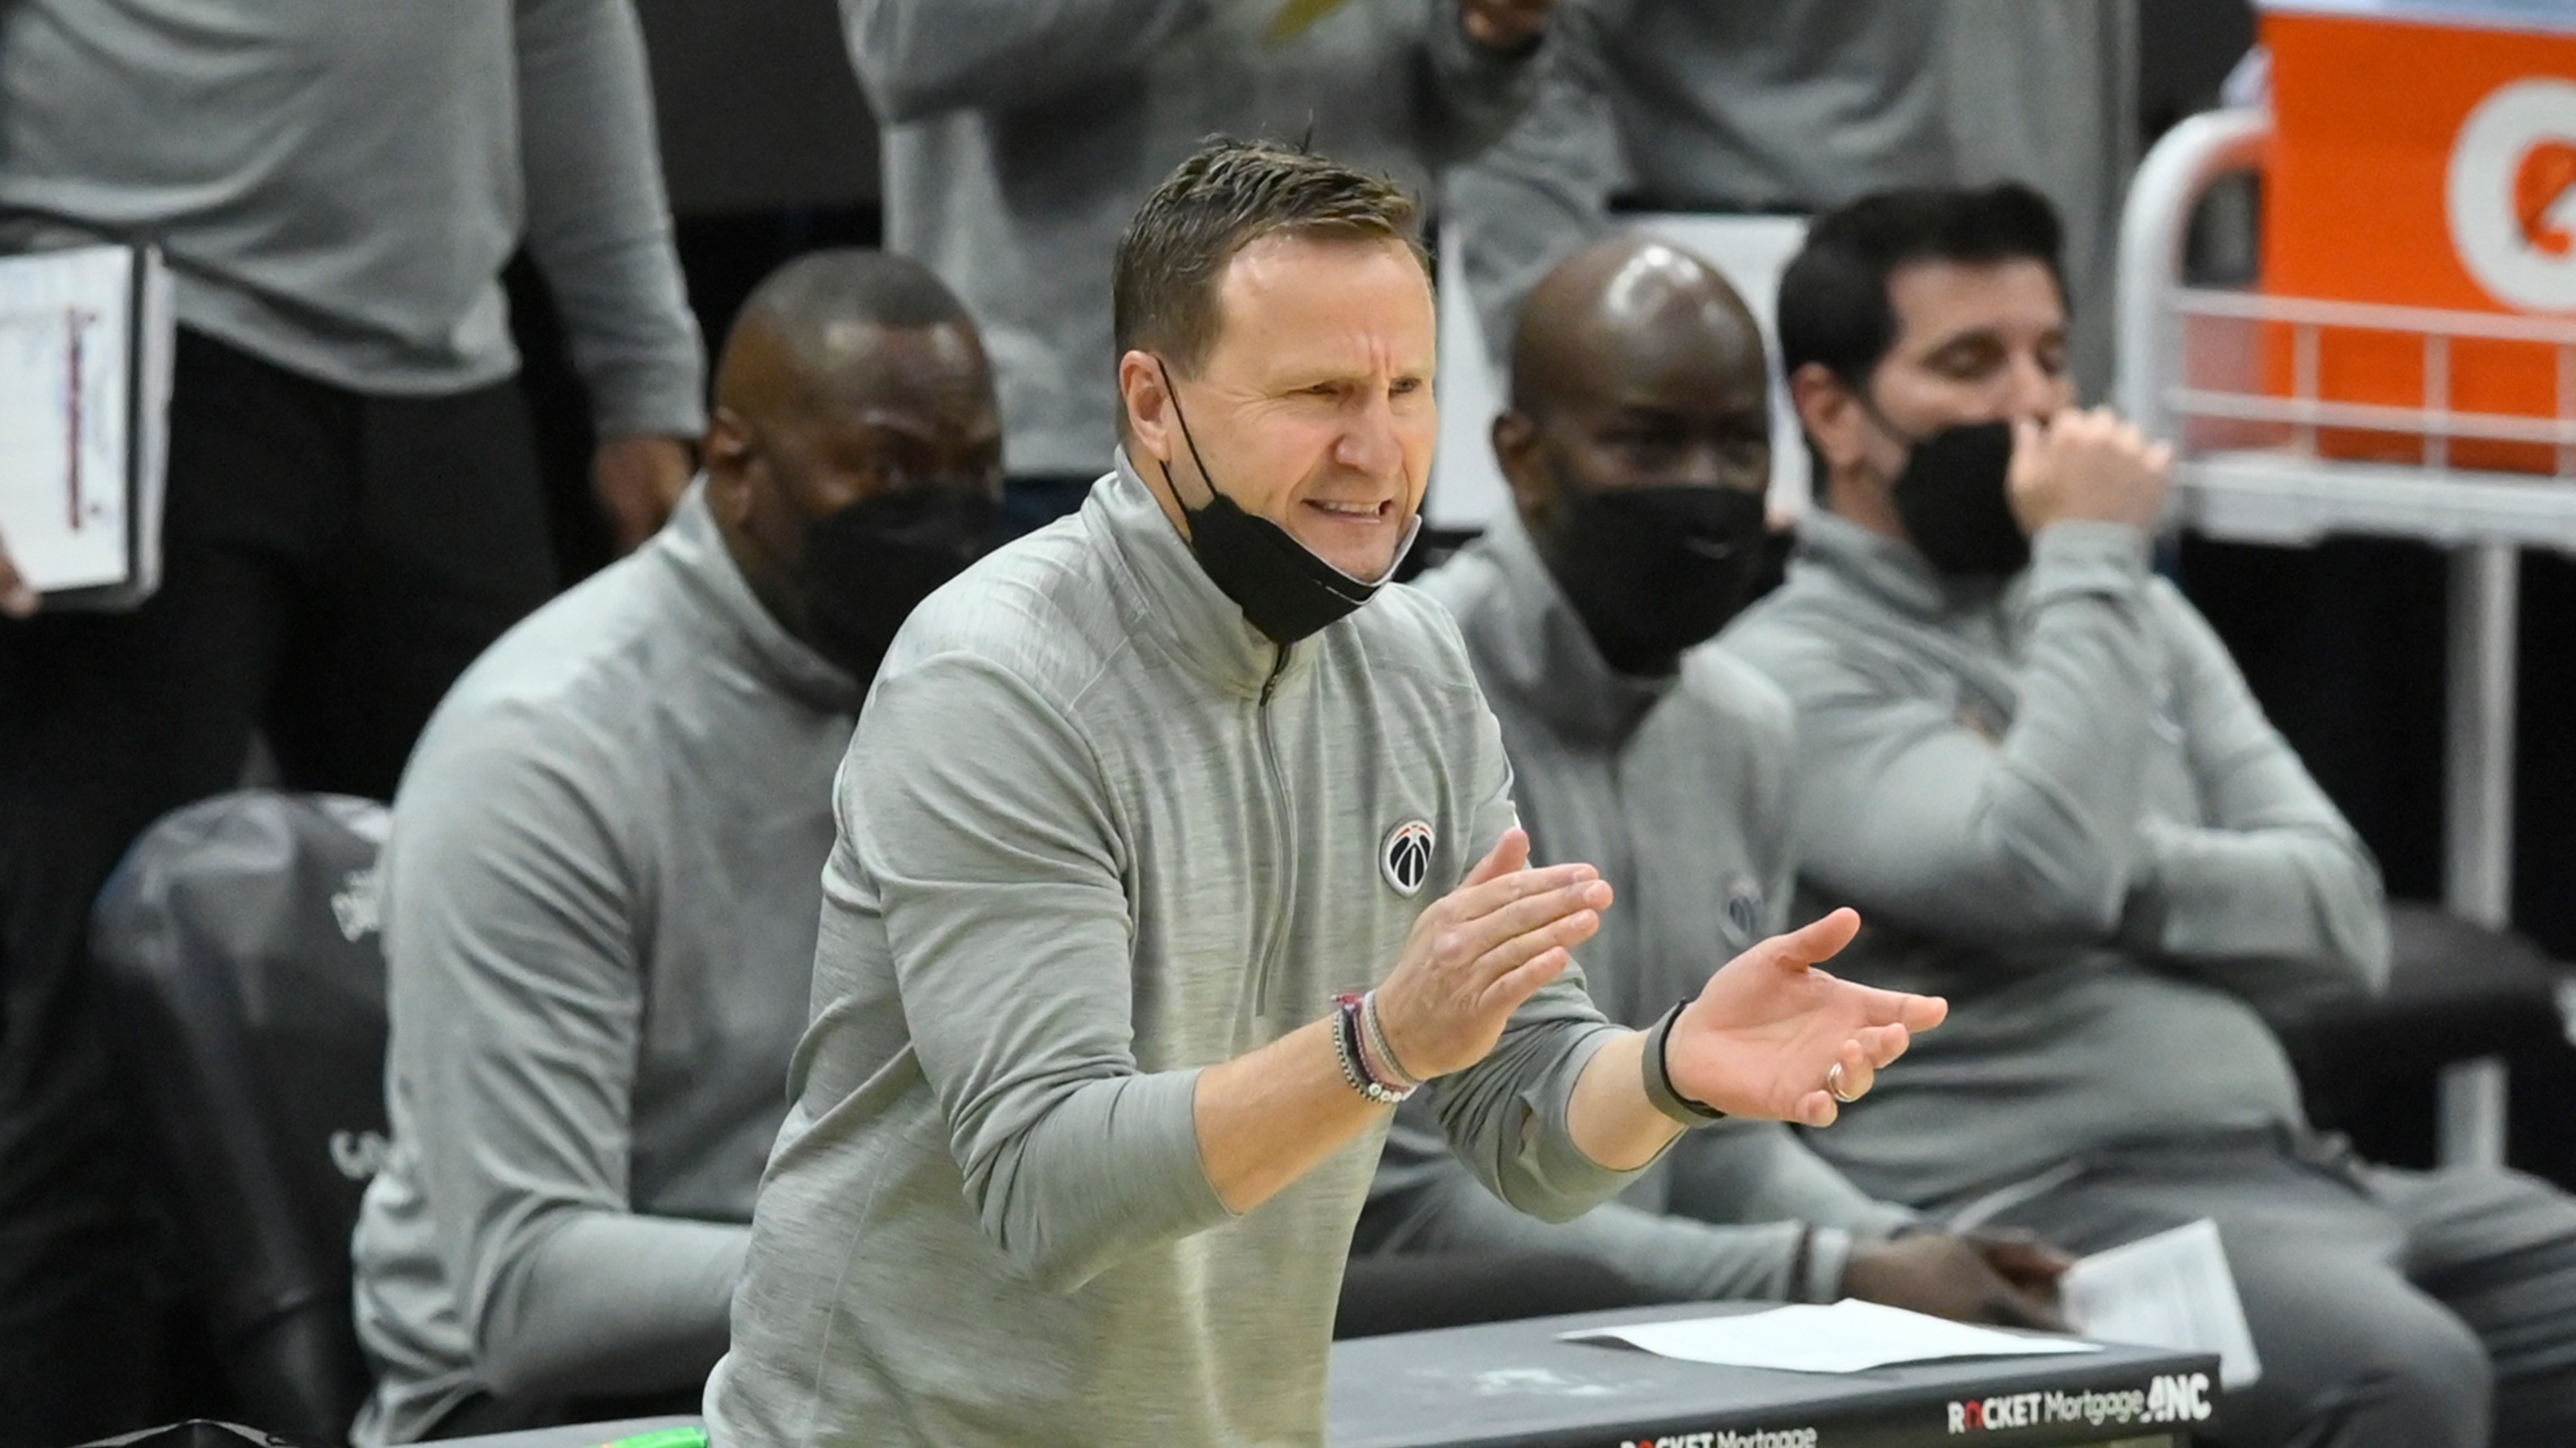 With Contract Up, Scott Brooks Wants to Stay as Head Coach of Wizards